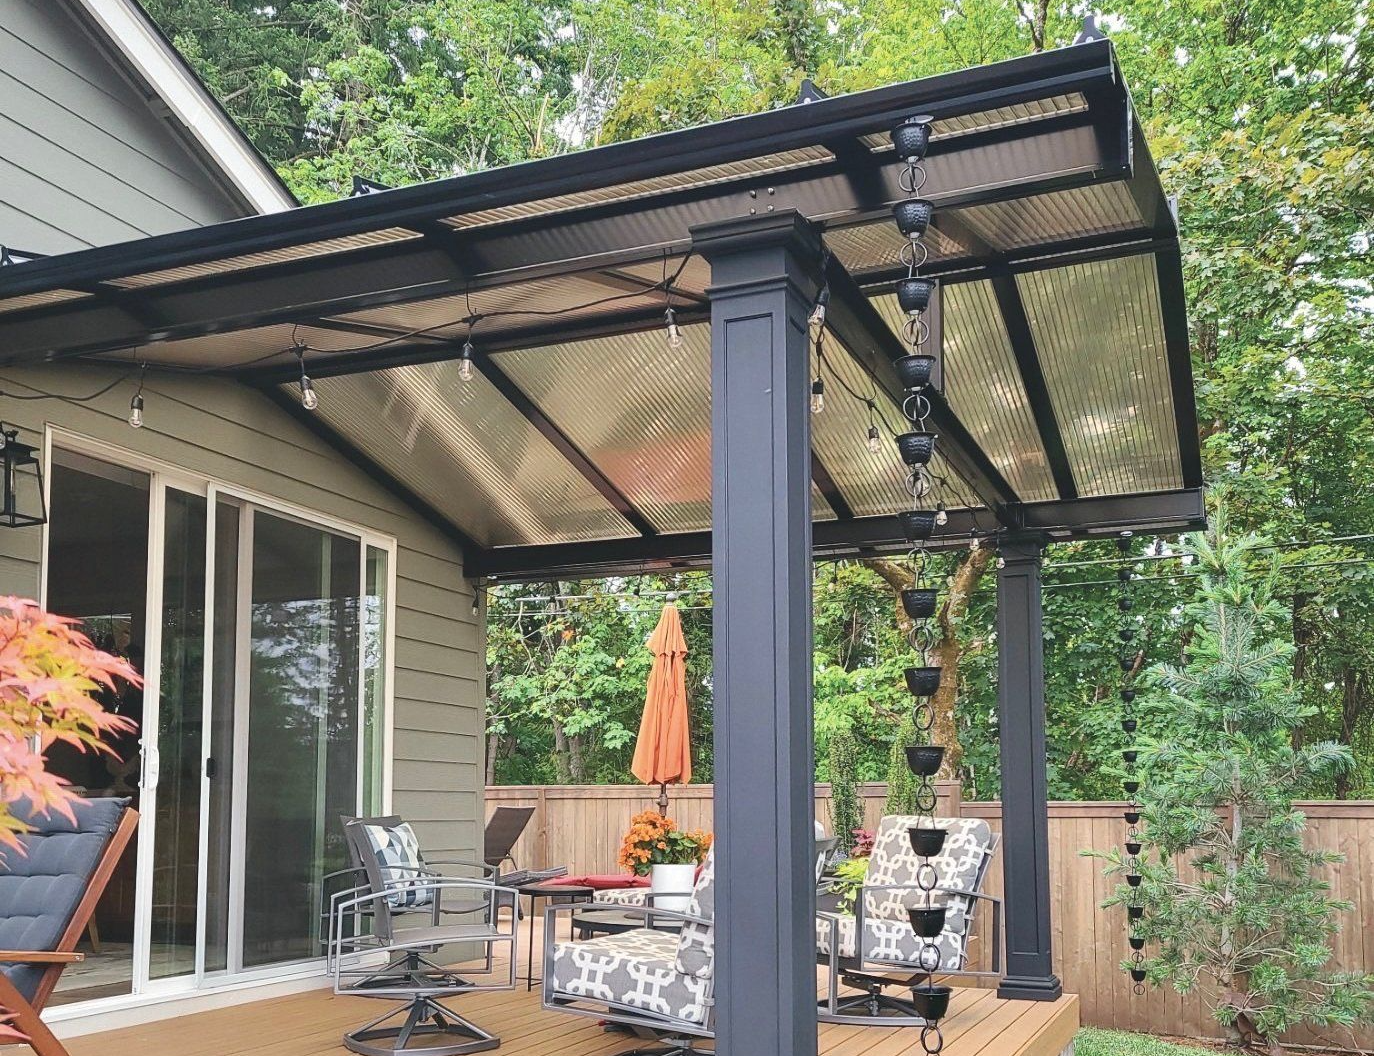 Patio Covers in Brush Prairie Washington - Gable Roof with ACRYLITE Acrylic